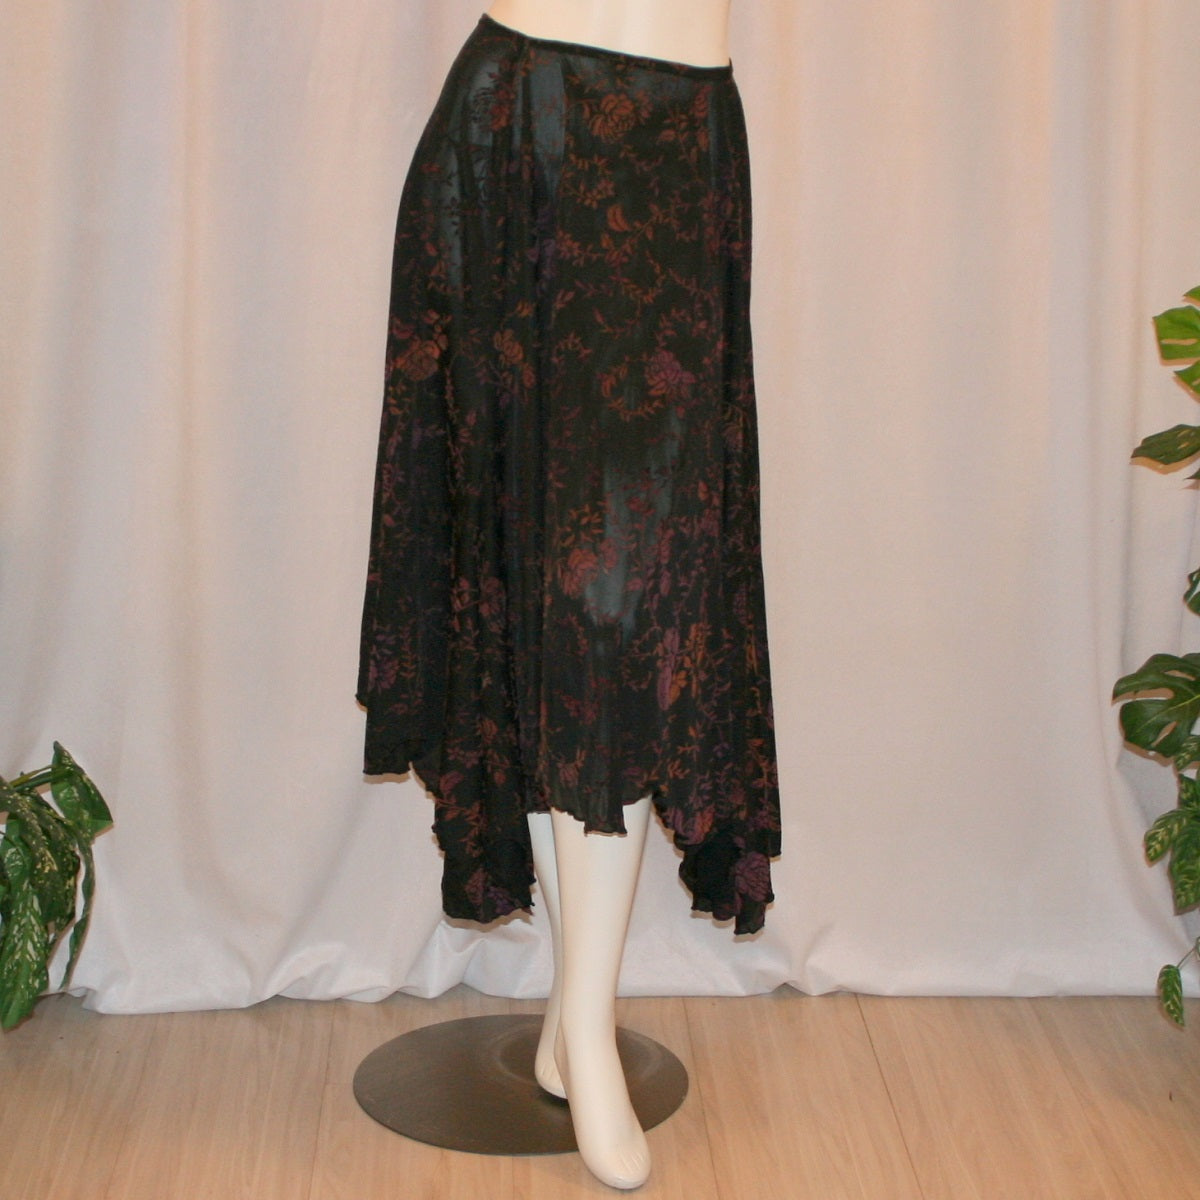 Black velveteen ballroom skirt with a gorgeous floral pattern, it creates a delightful swirl of autumn colors with its gored seaming and abundant fullness, and elasticized waist for ease of fit. Deep scalloped hemline adds a touch of charm, perfect for any ballroom event, studio dance parties, practice, or teaching!